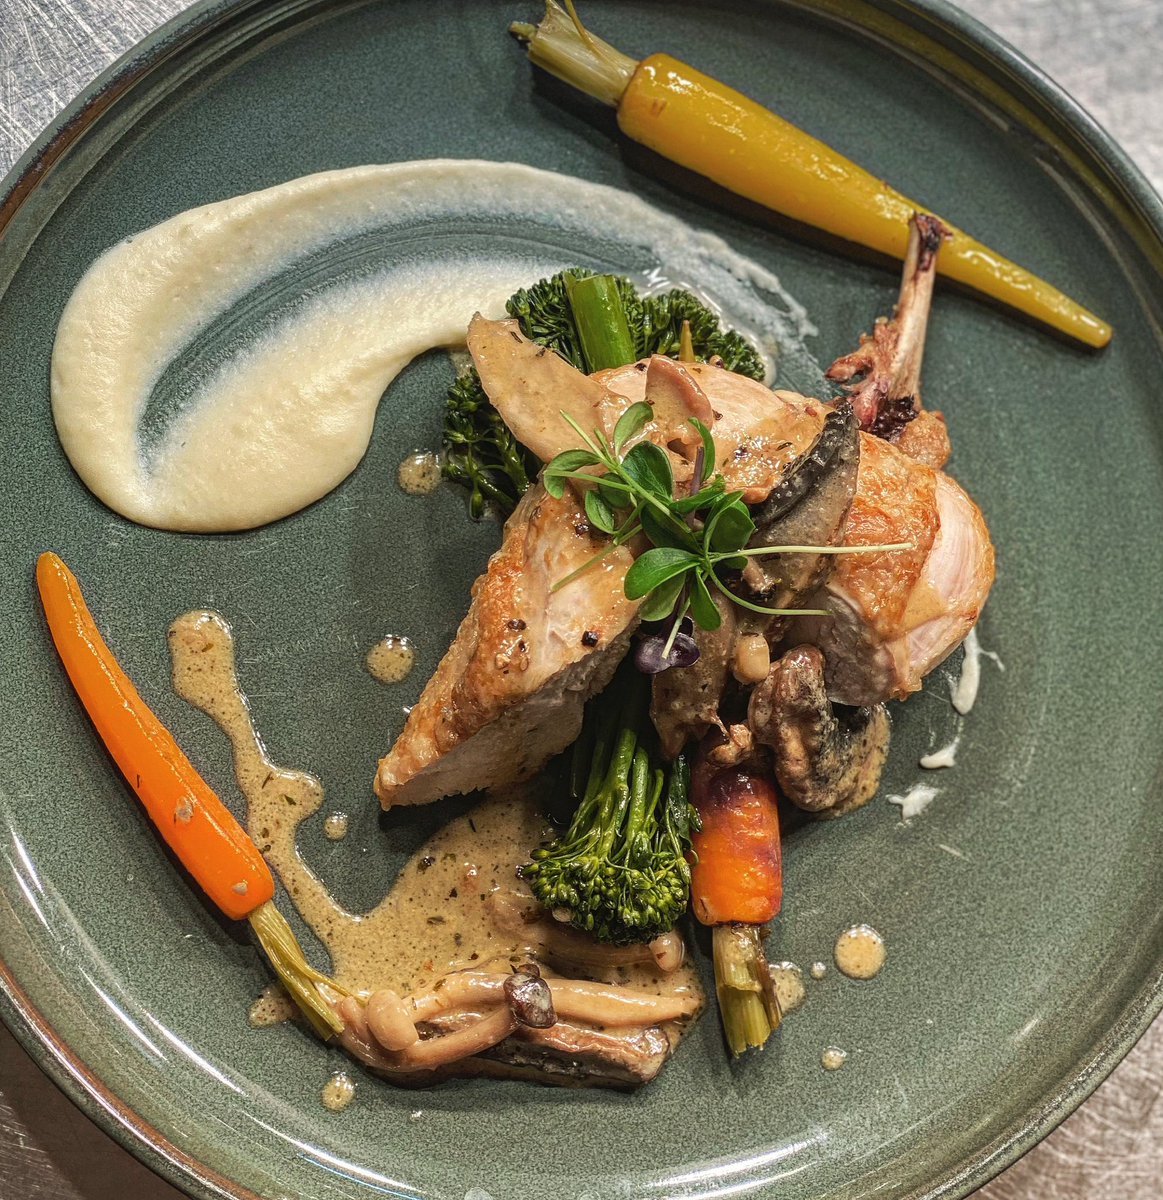 This Weekend’s Special: Chicken Supreme with Celeriac Pomme Purée, Rainbow Carrots & Wild Mushroom Emulsion 🤩 #LouthChat #No3Collon #FoodOscars